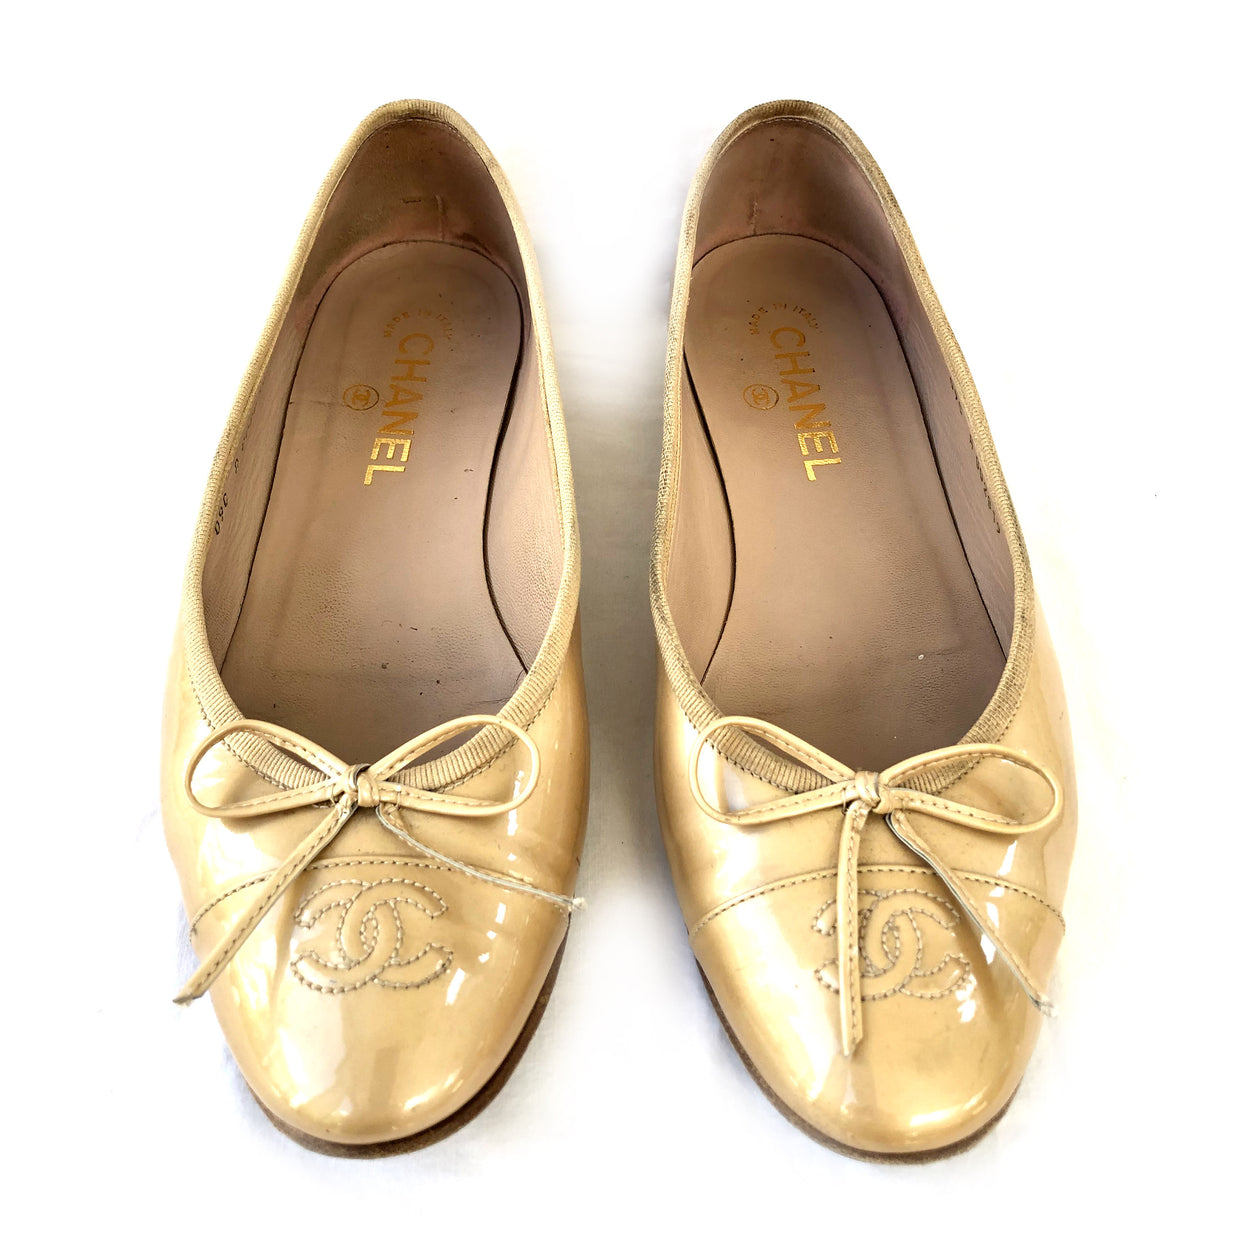 Chanel - Authenticated Ballet Flats - Patent Leather Gold for Women, Never Worn